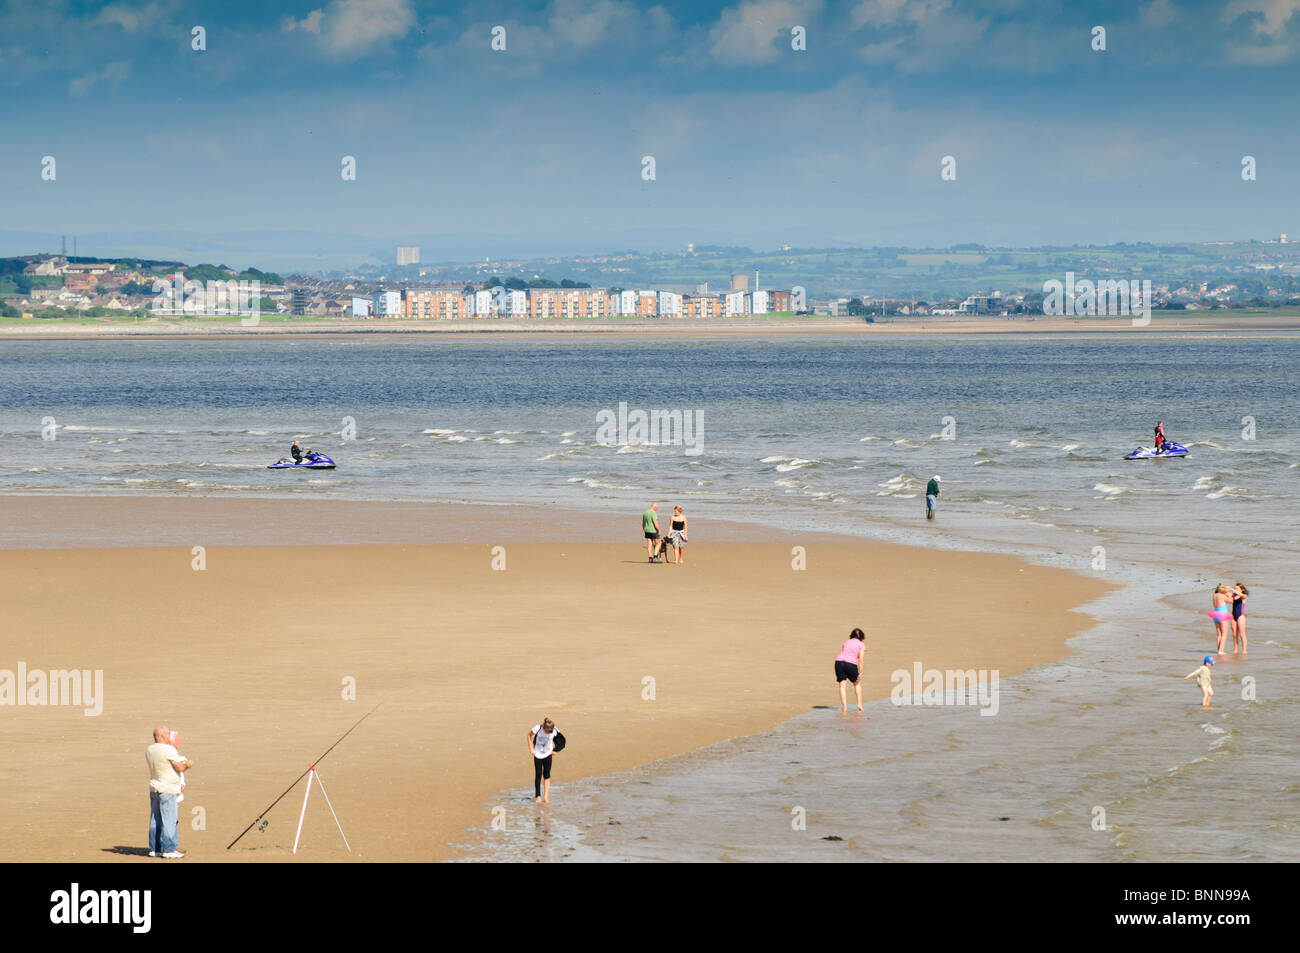 Looking towards Llanelli from The Millennium Coastal park, Burry Port, Carmarthenshire South Wales UK Stock Photo